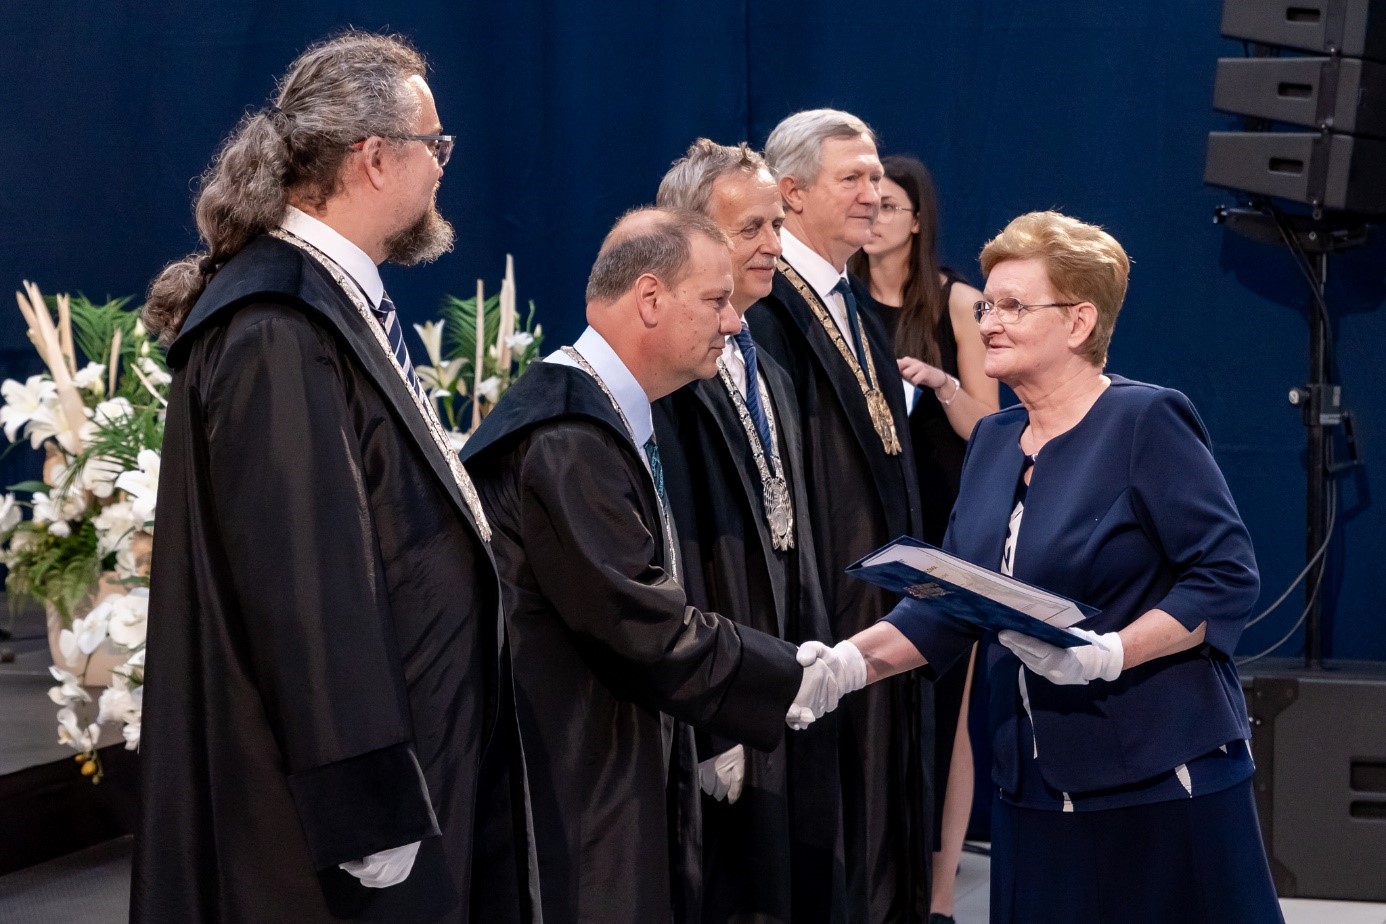 Gallery of the gold diploma ceremony